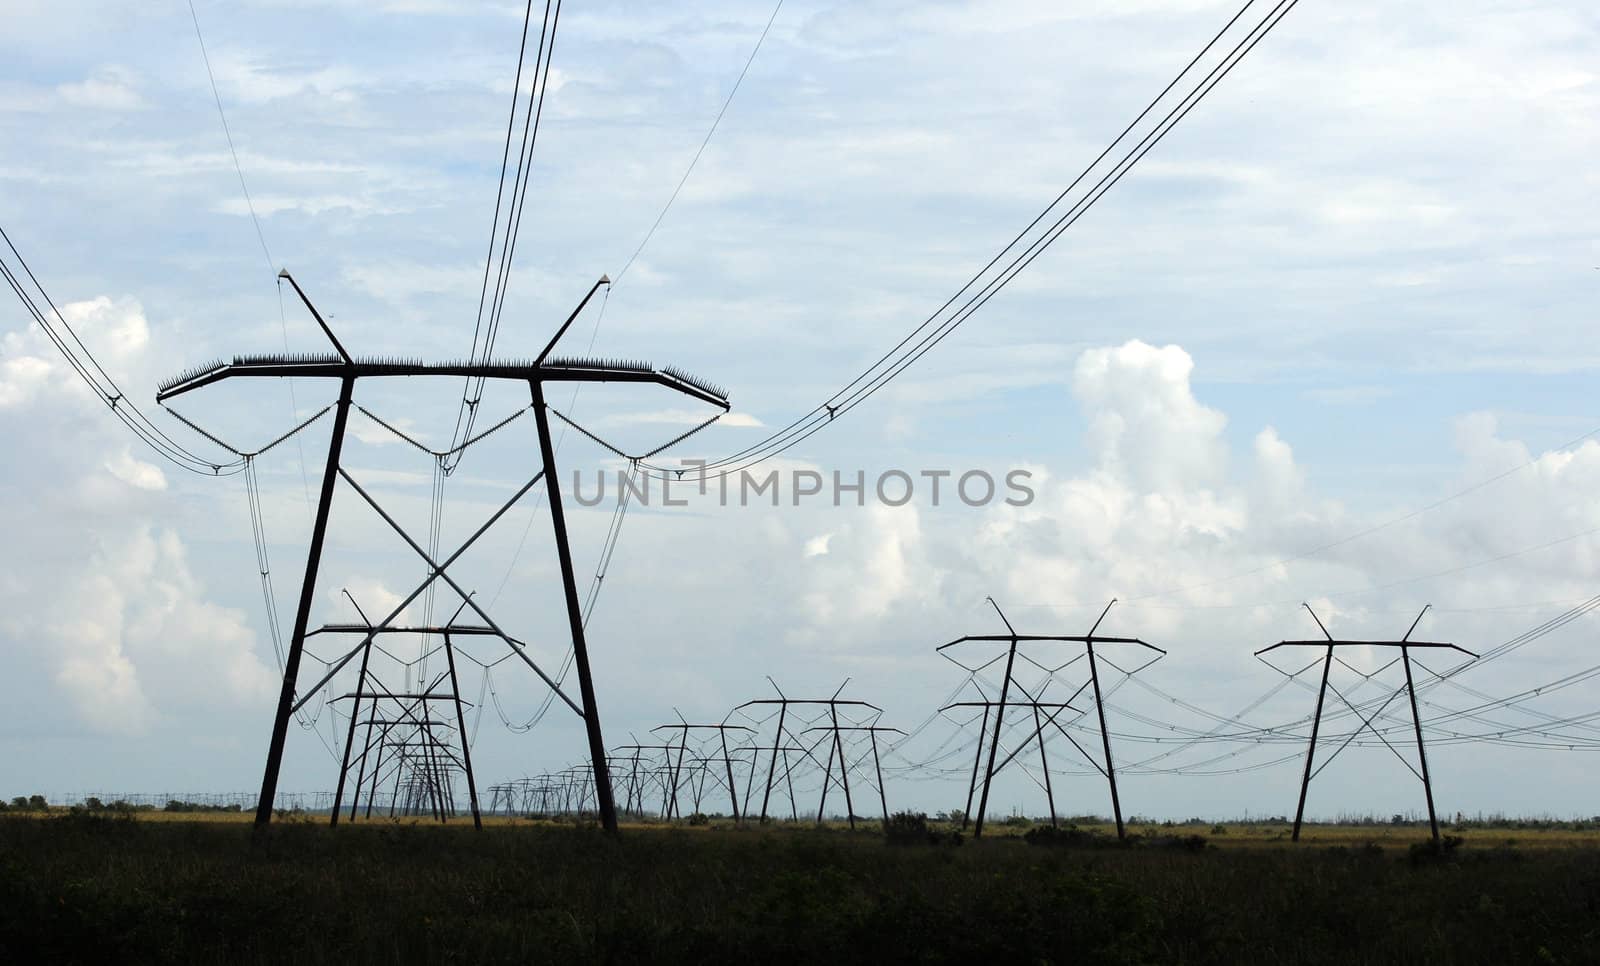 Electric power lines by ftlaudgirl